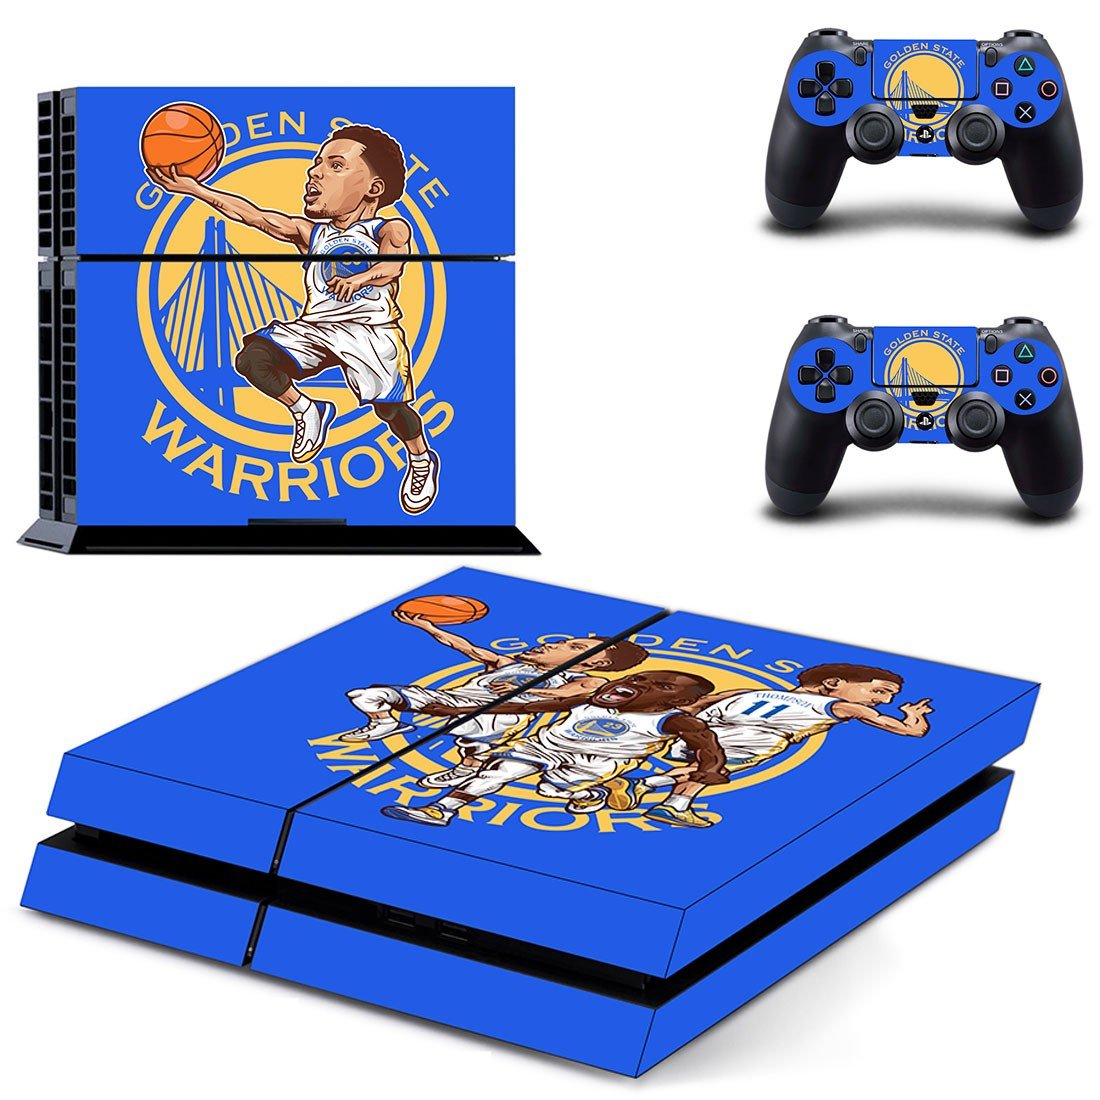 PlayStation 4 And Controllers Skin Cover Golden state warriors